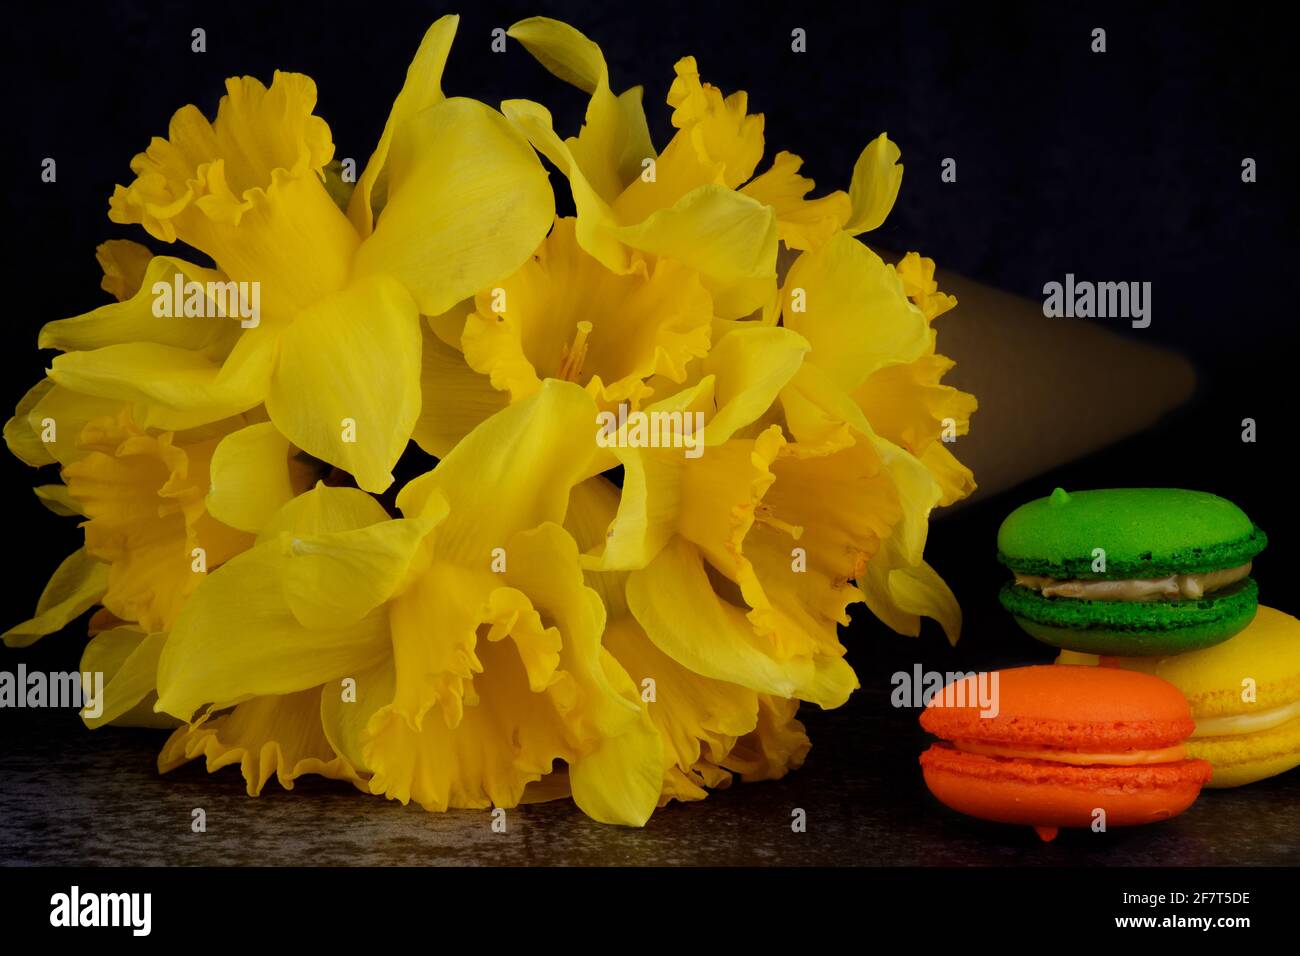 A bouquet of Daffodils in a paper cone and three colorful macarons (green, orange, yellow) are lying beside it. Stock Photo